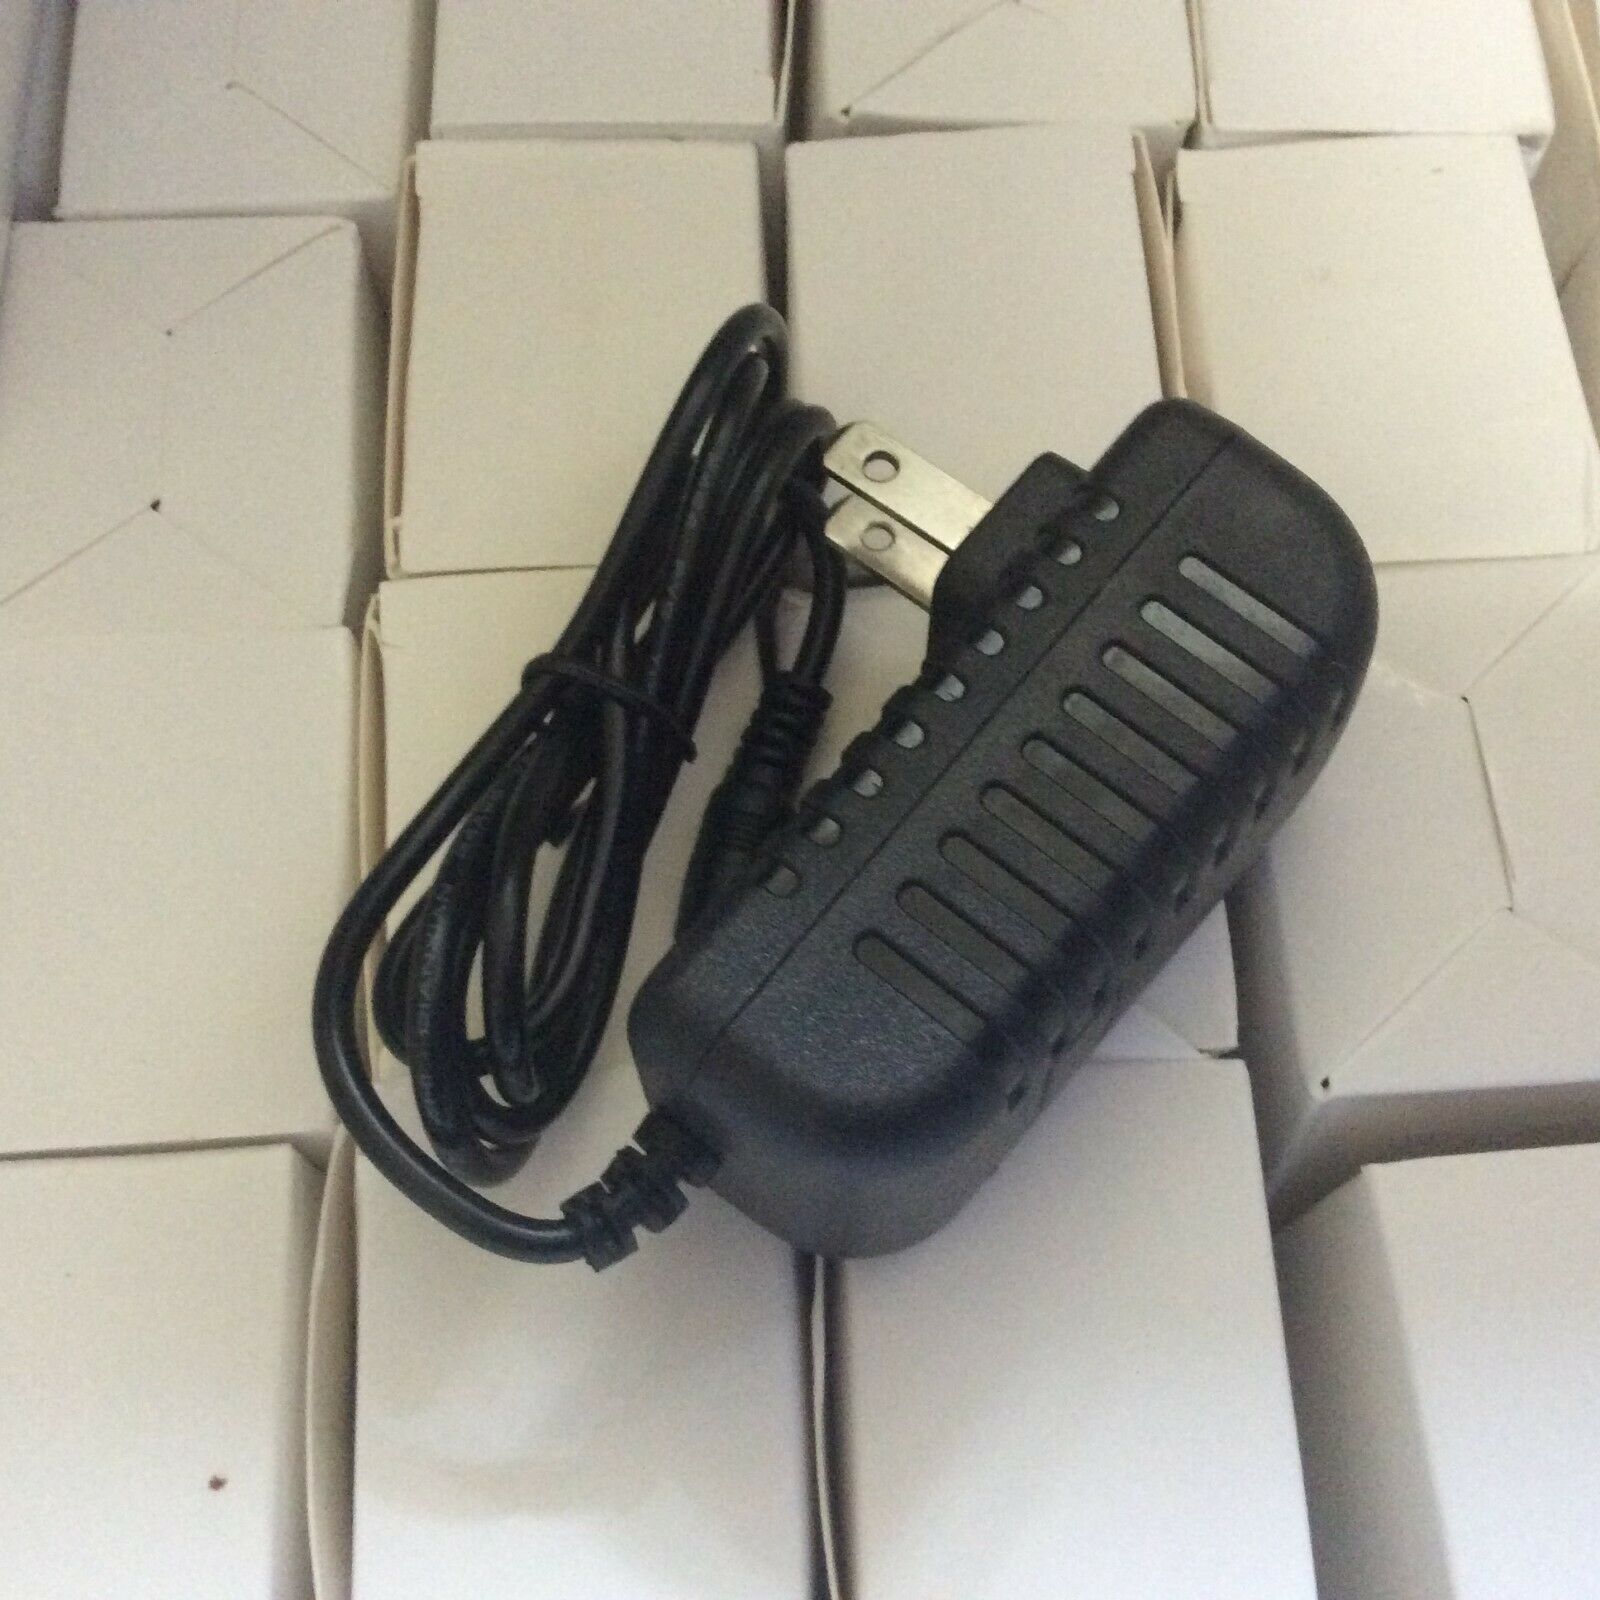 9V AC DC Power Adapter Charger For Boss PSA-120S 120T Archer Cat. No. 273-1656 SpecificationInput: AC 100-240V, 50-60Hz